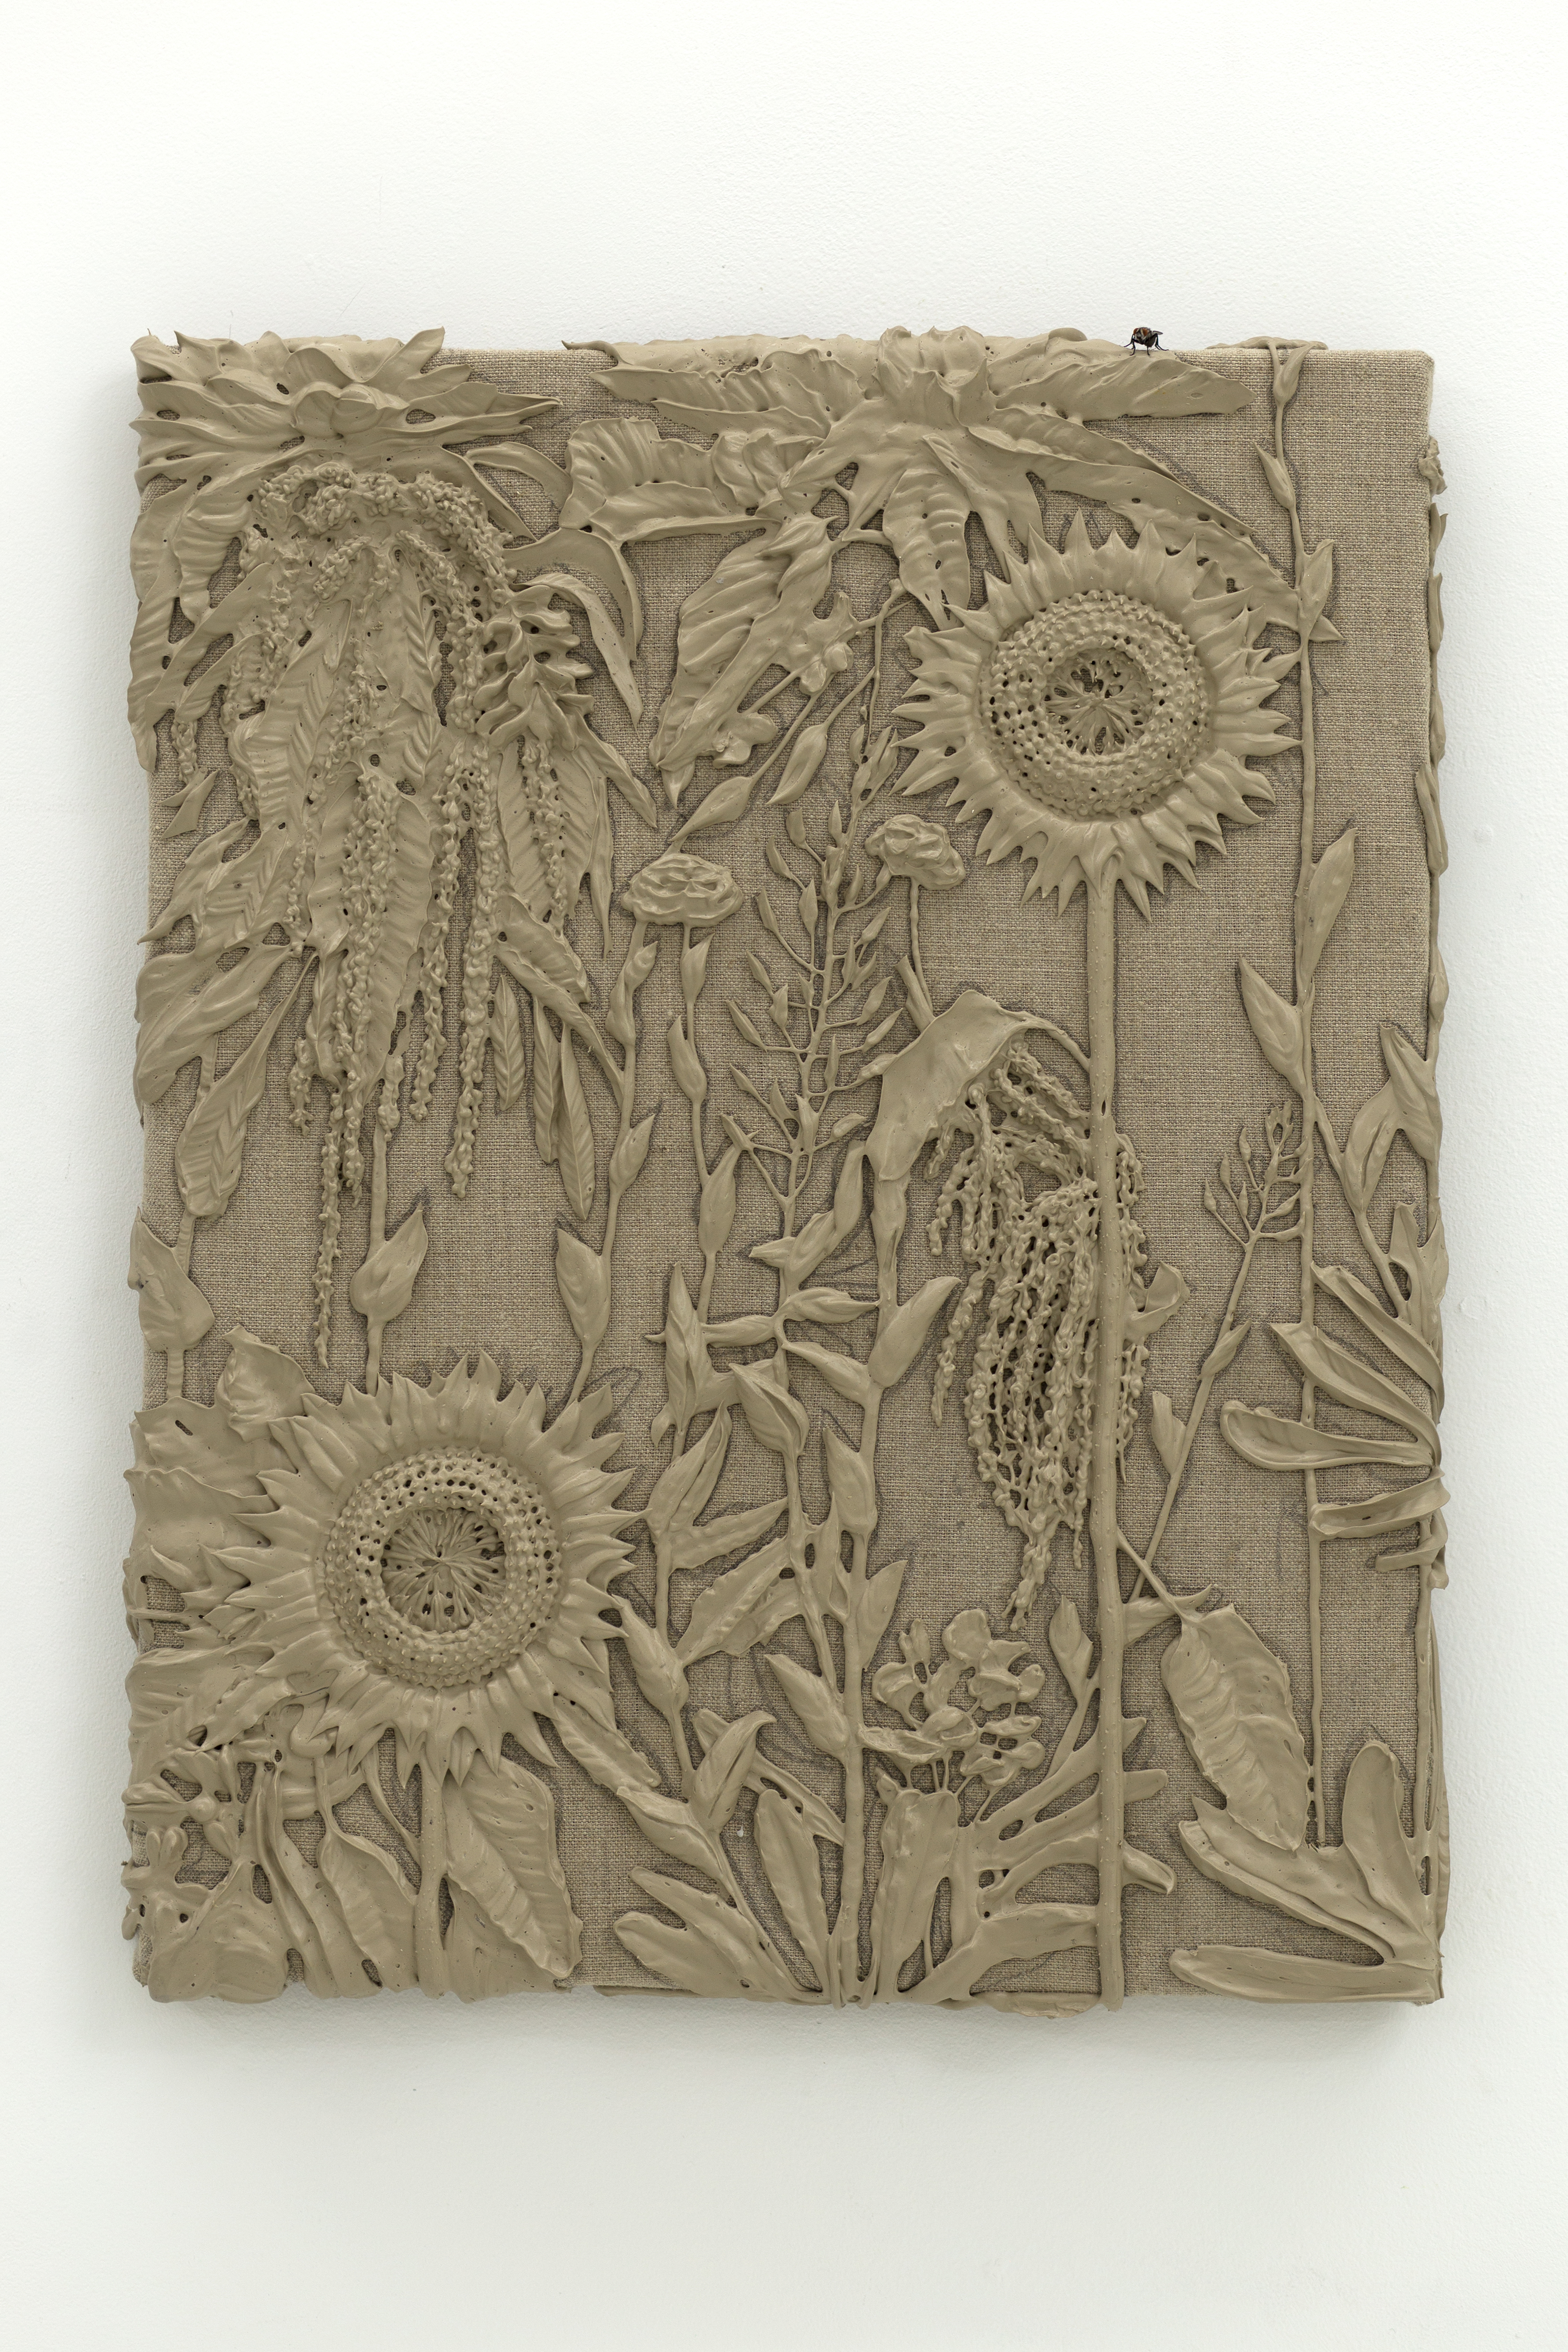 Brown monotone plastic painting of two sunflowers and assorted other plants